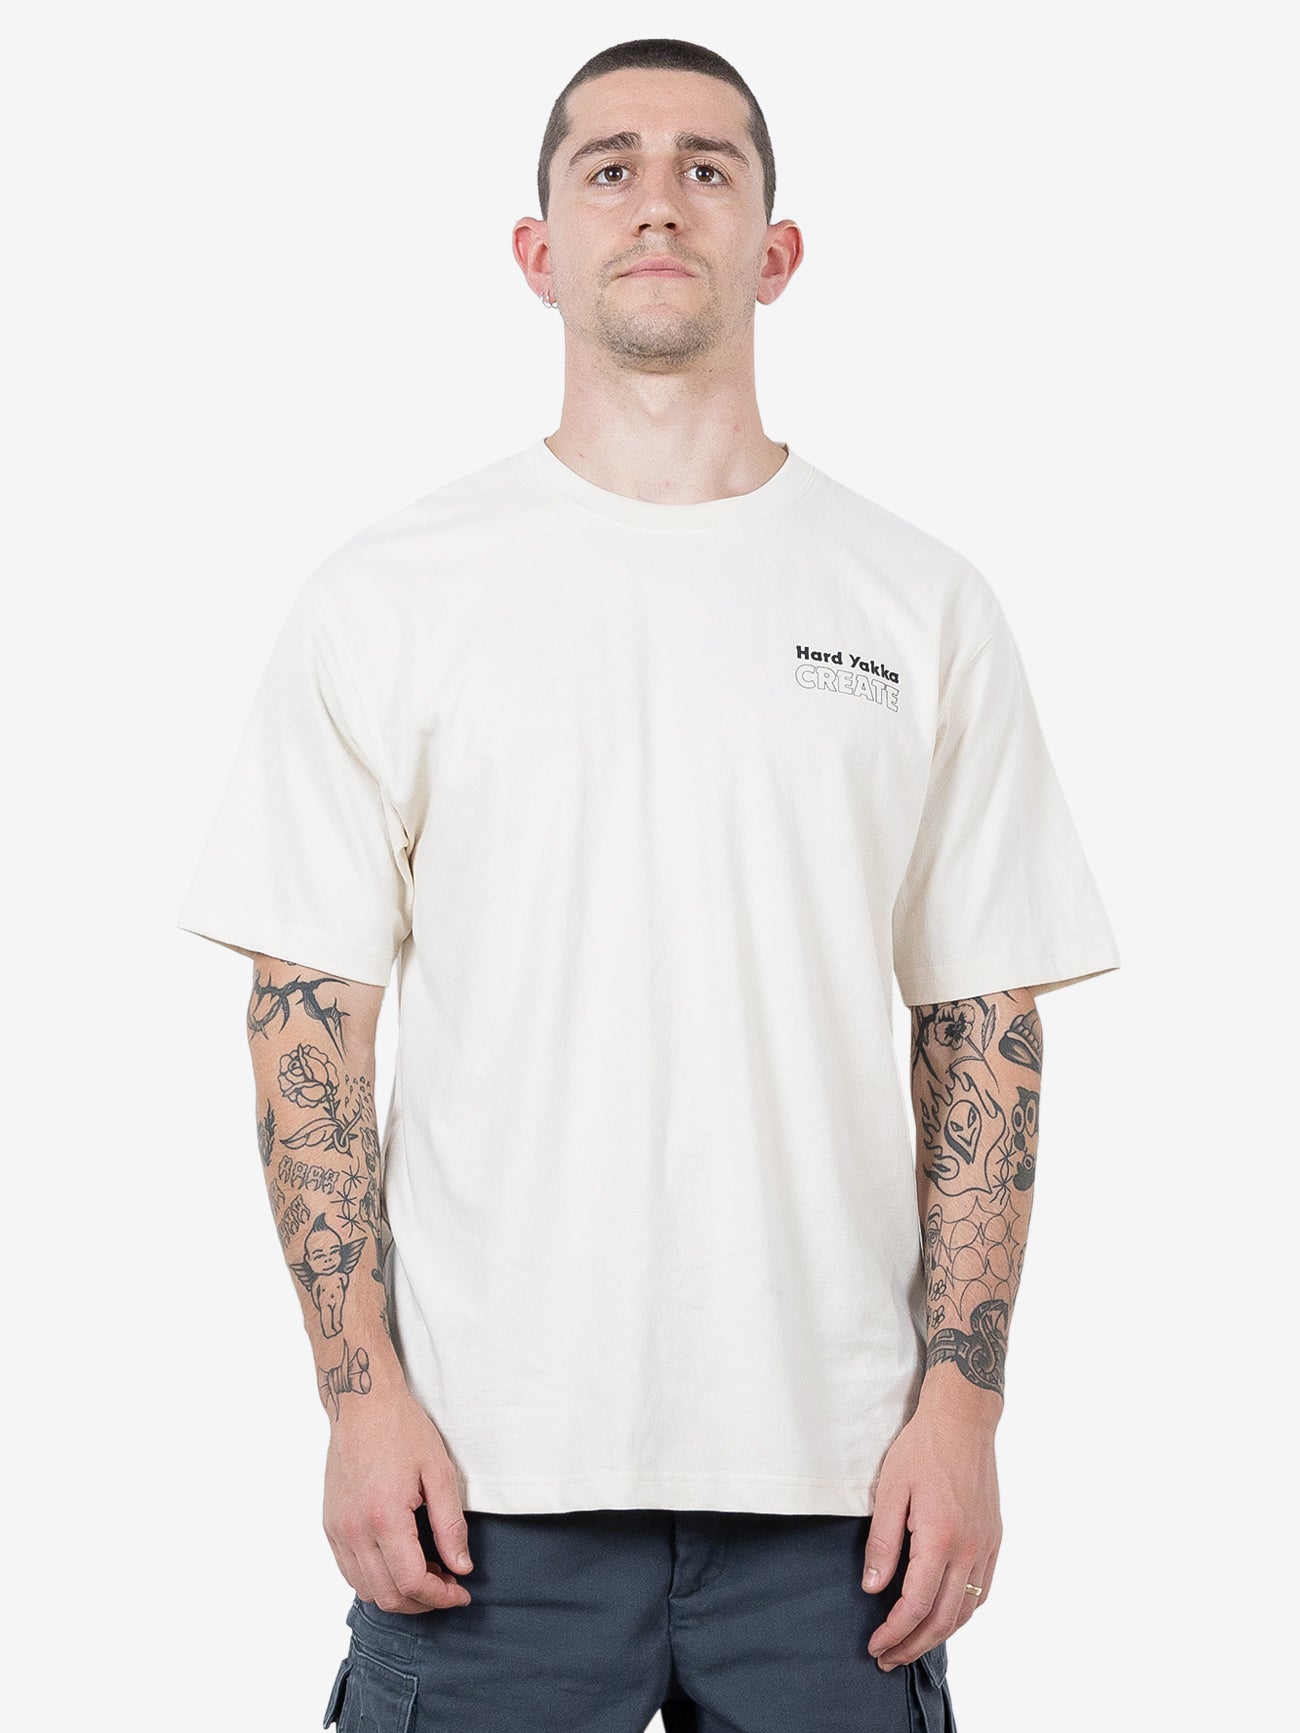 HYC Tough Going Oversize Fit Tee - Unbleached